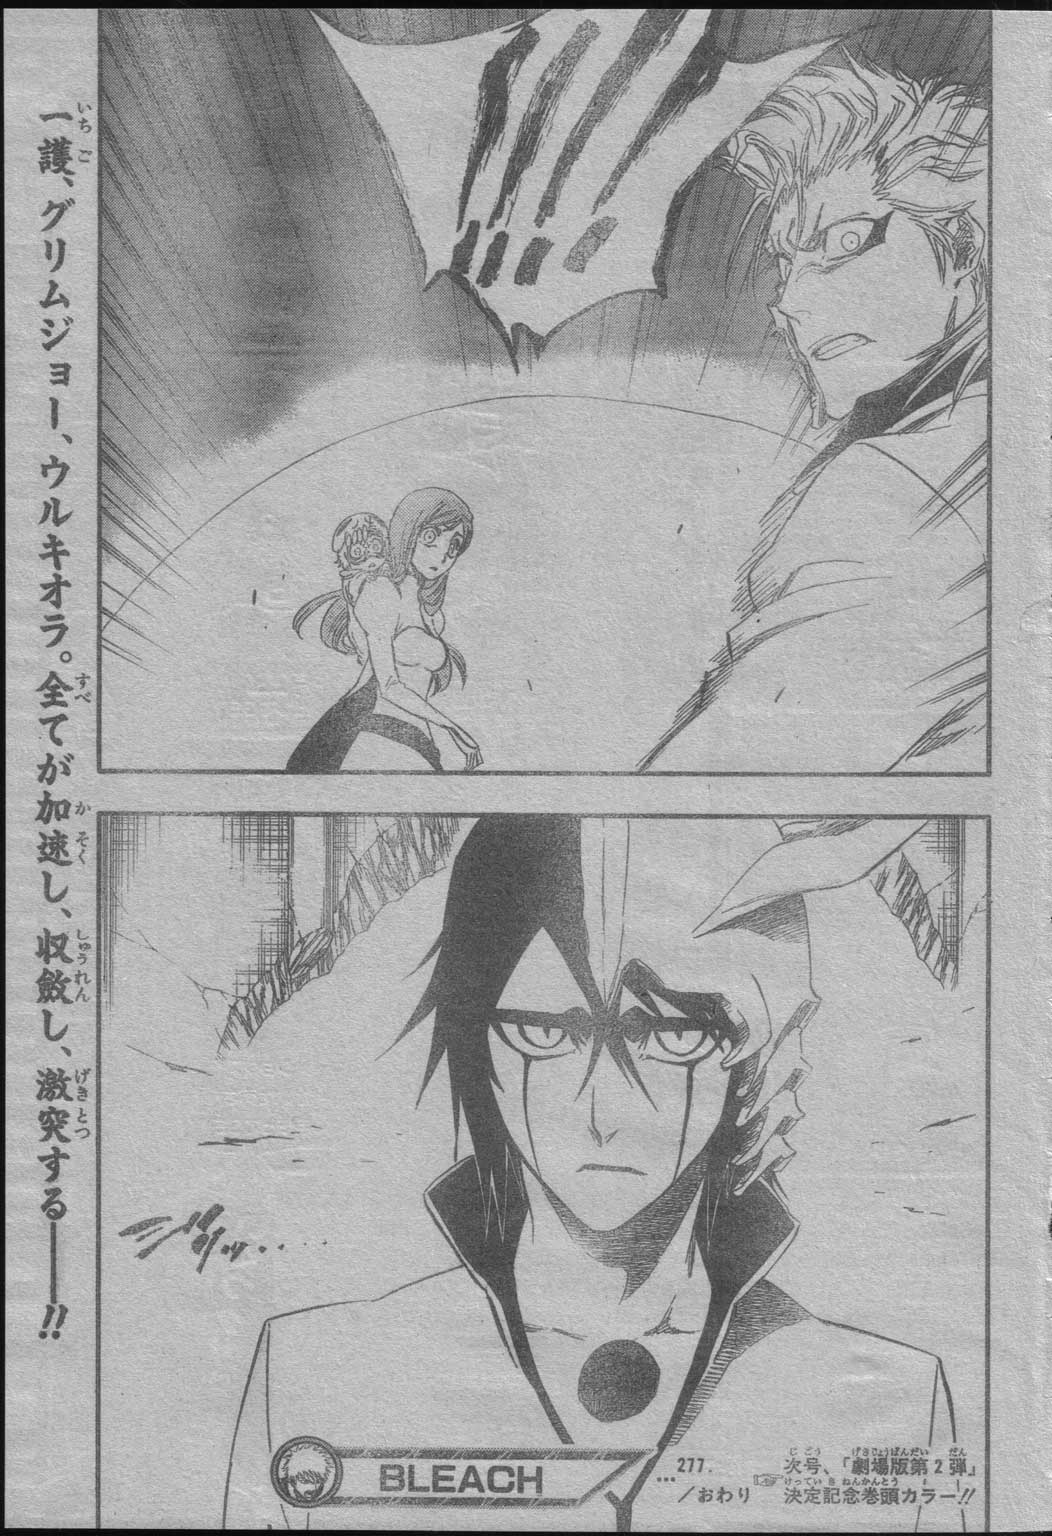 Bleach 6 4 月 モロ画バレ Red Guitar And The Truth